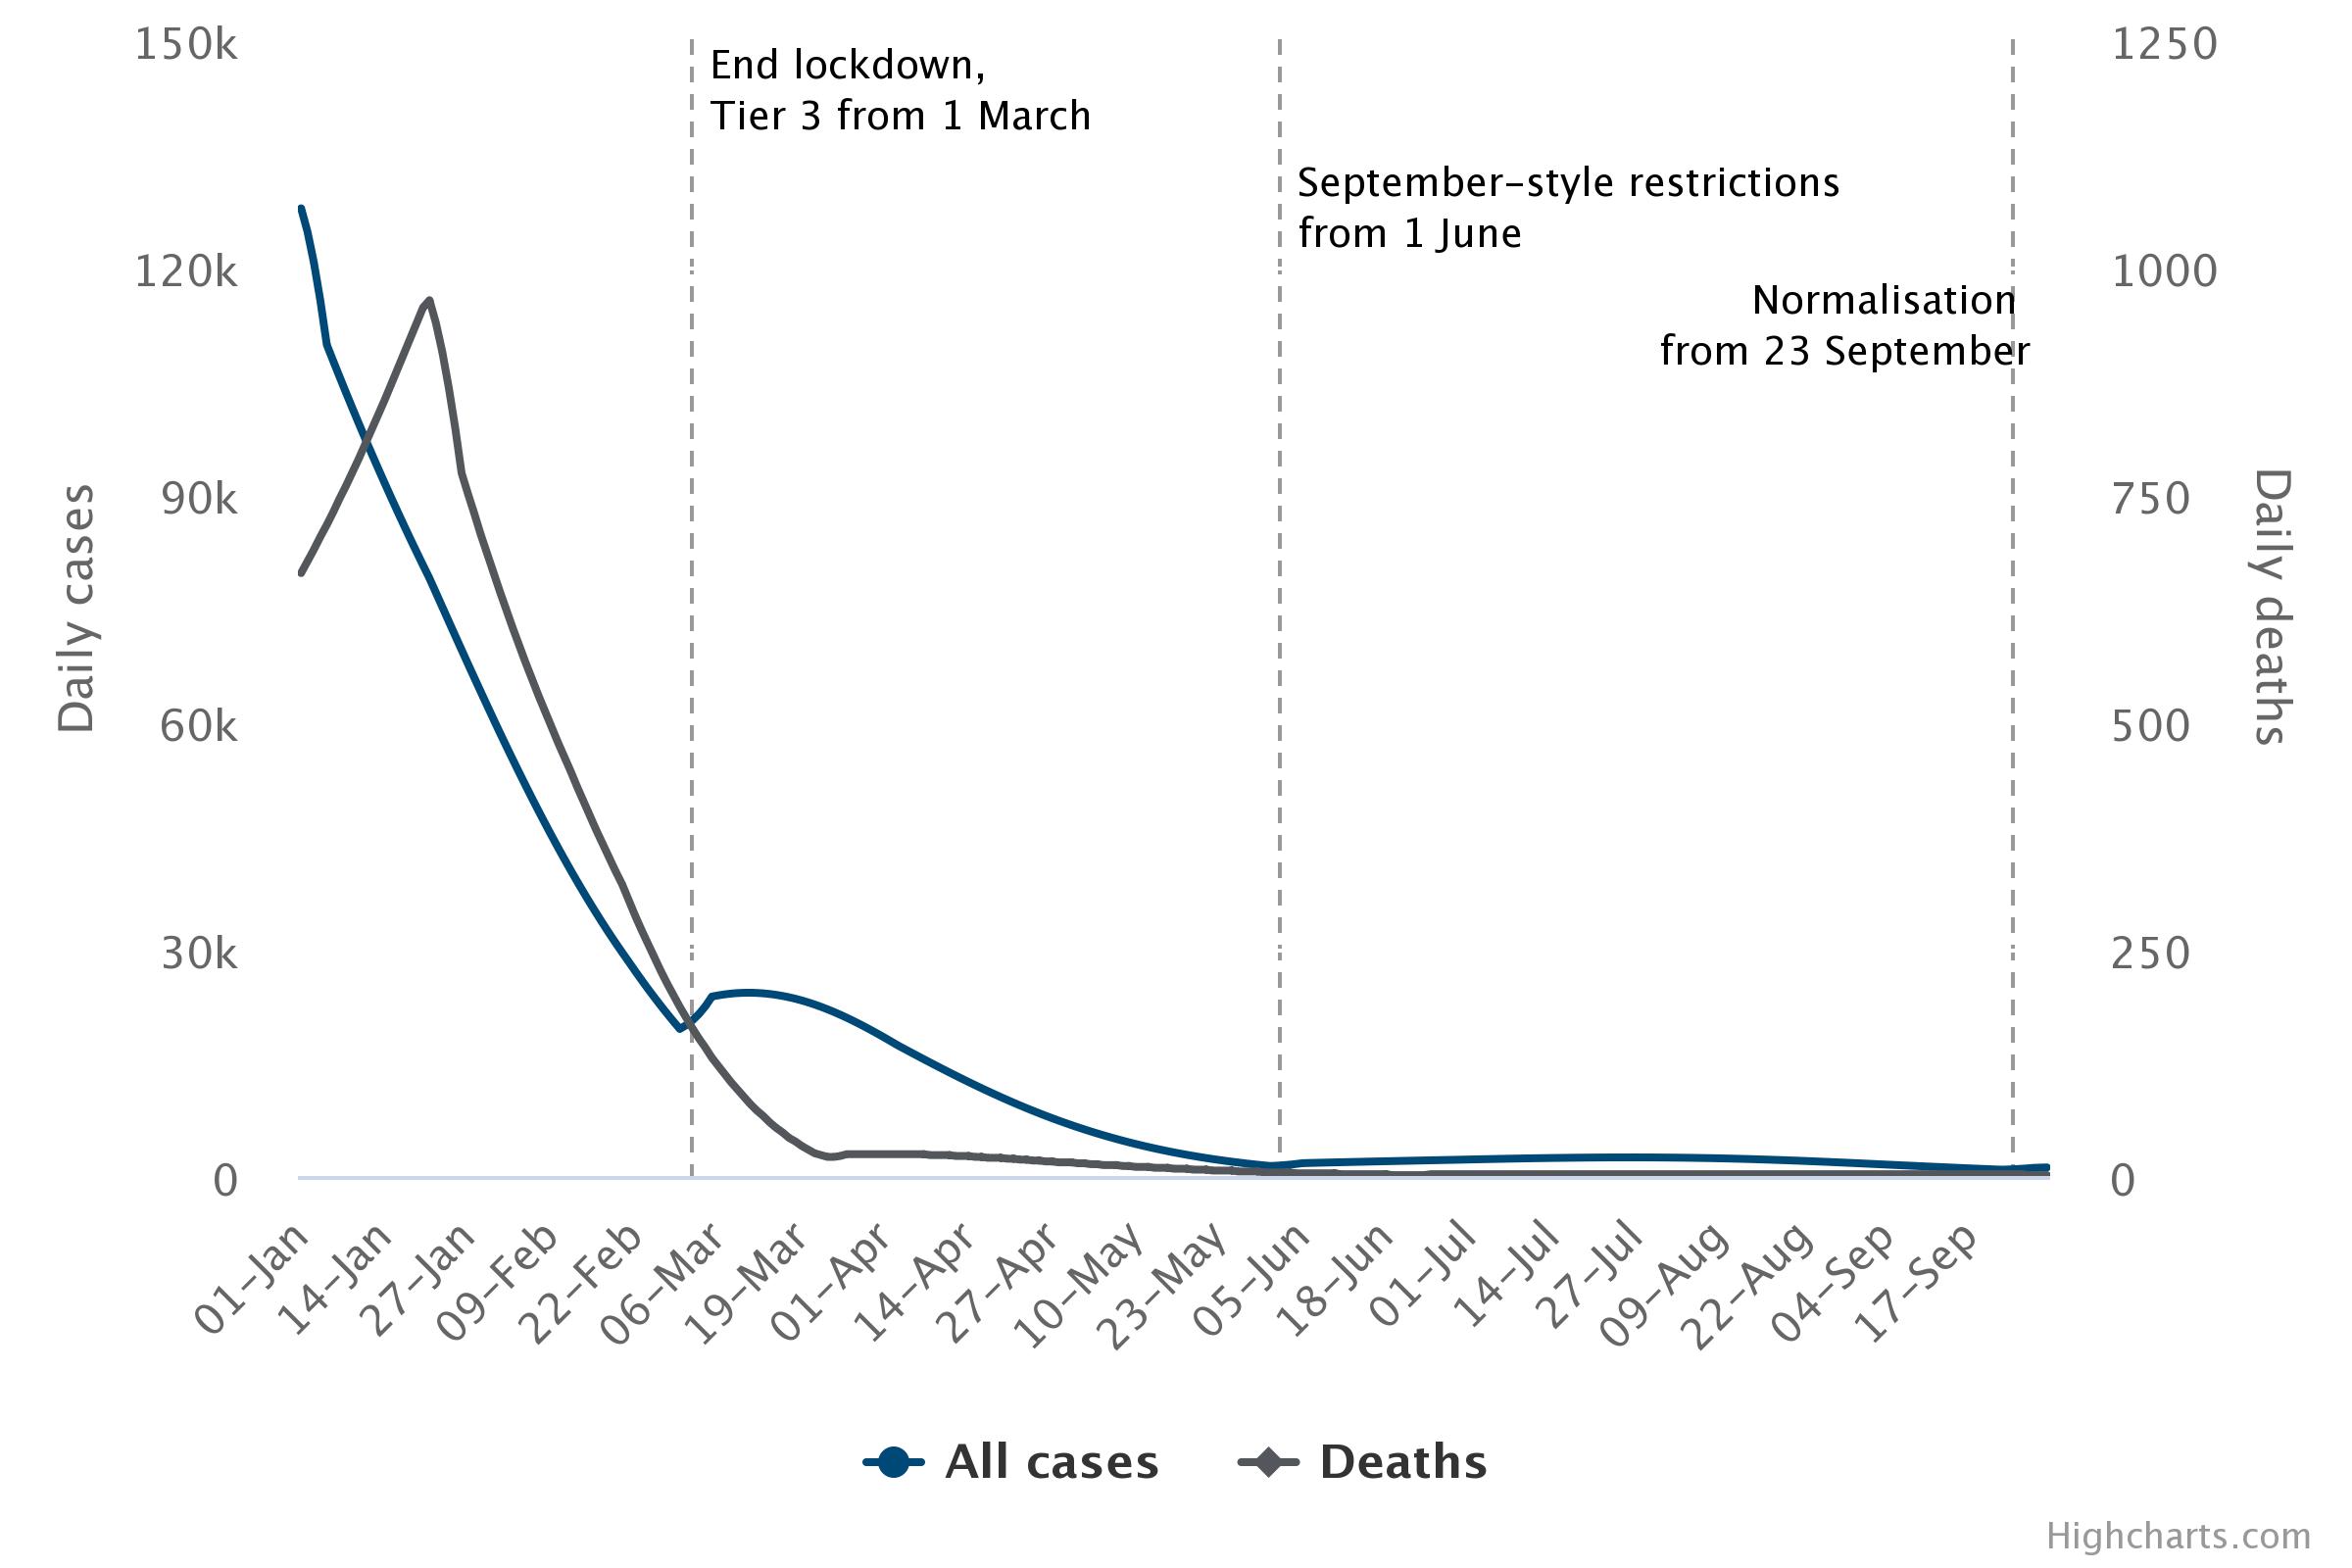 UK cases and deaths based on implied government plan